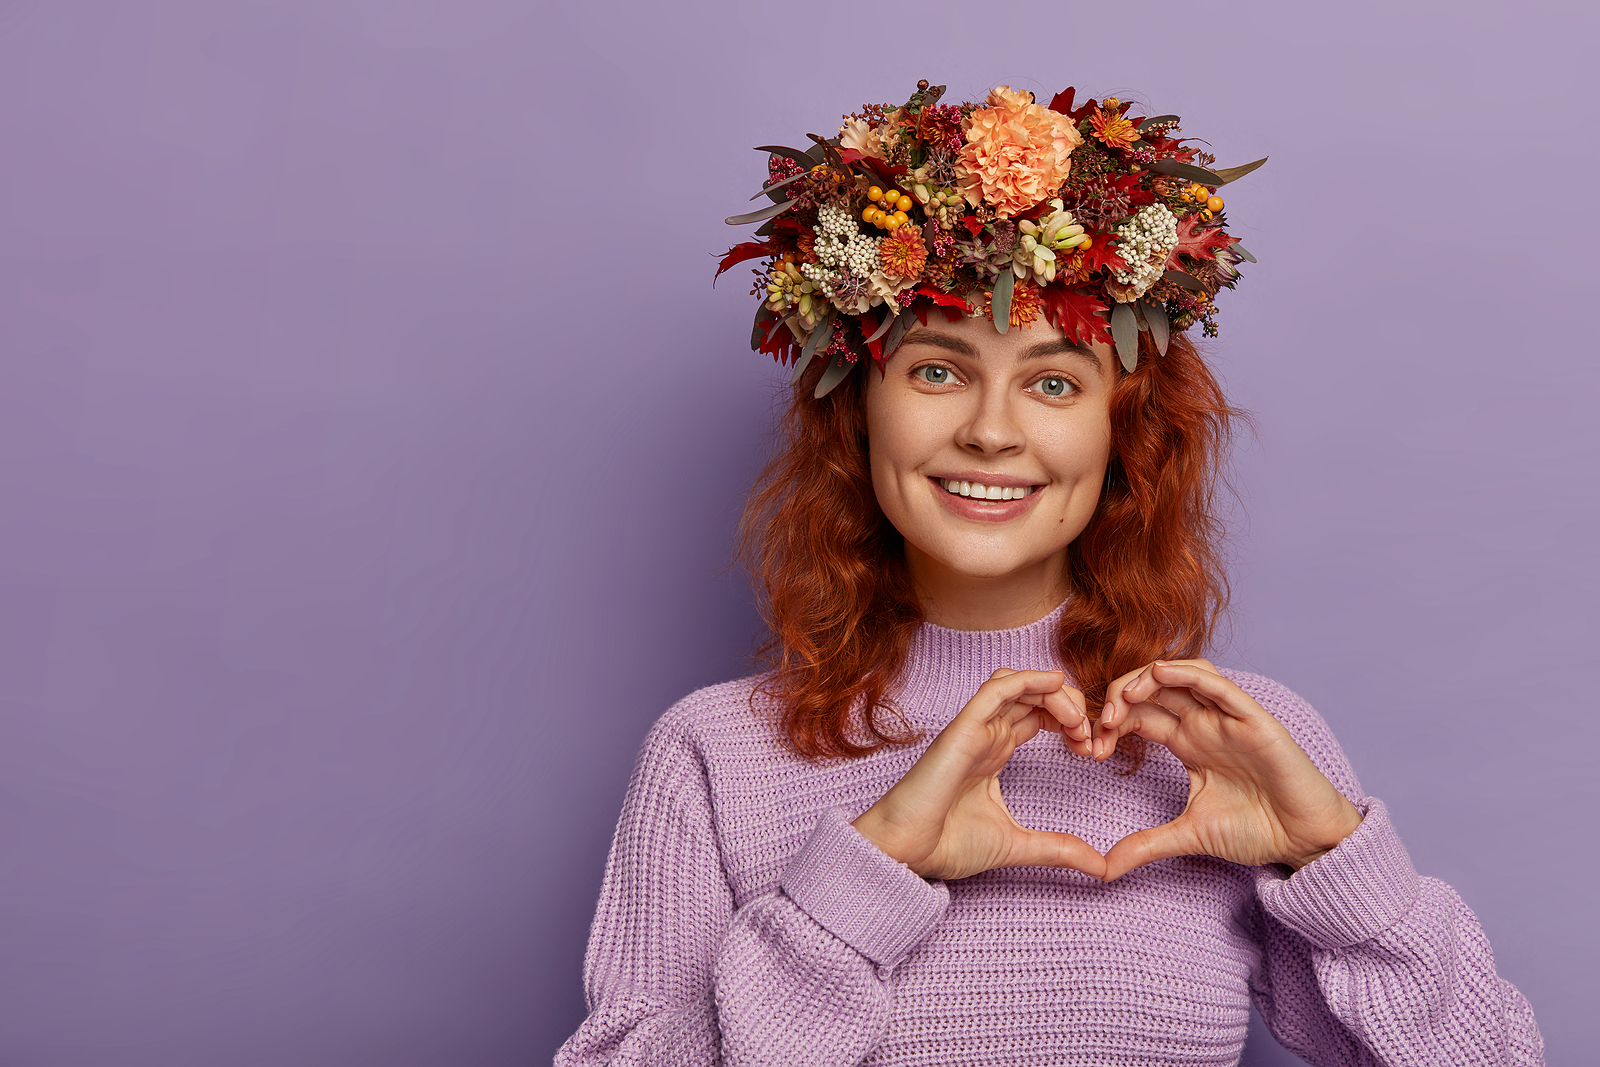 Image of a red haired woman with a large floral arrangement on top of her head. wearing a purple turtle neck and is making a heart with both her hands.